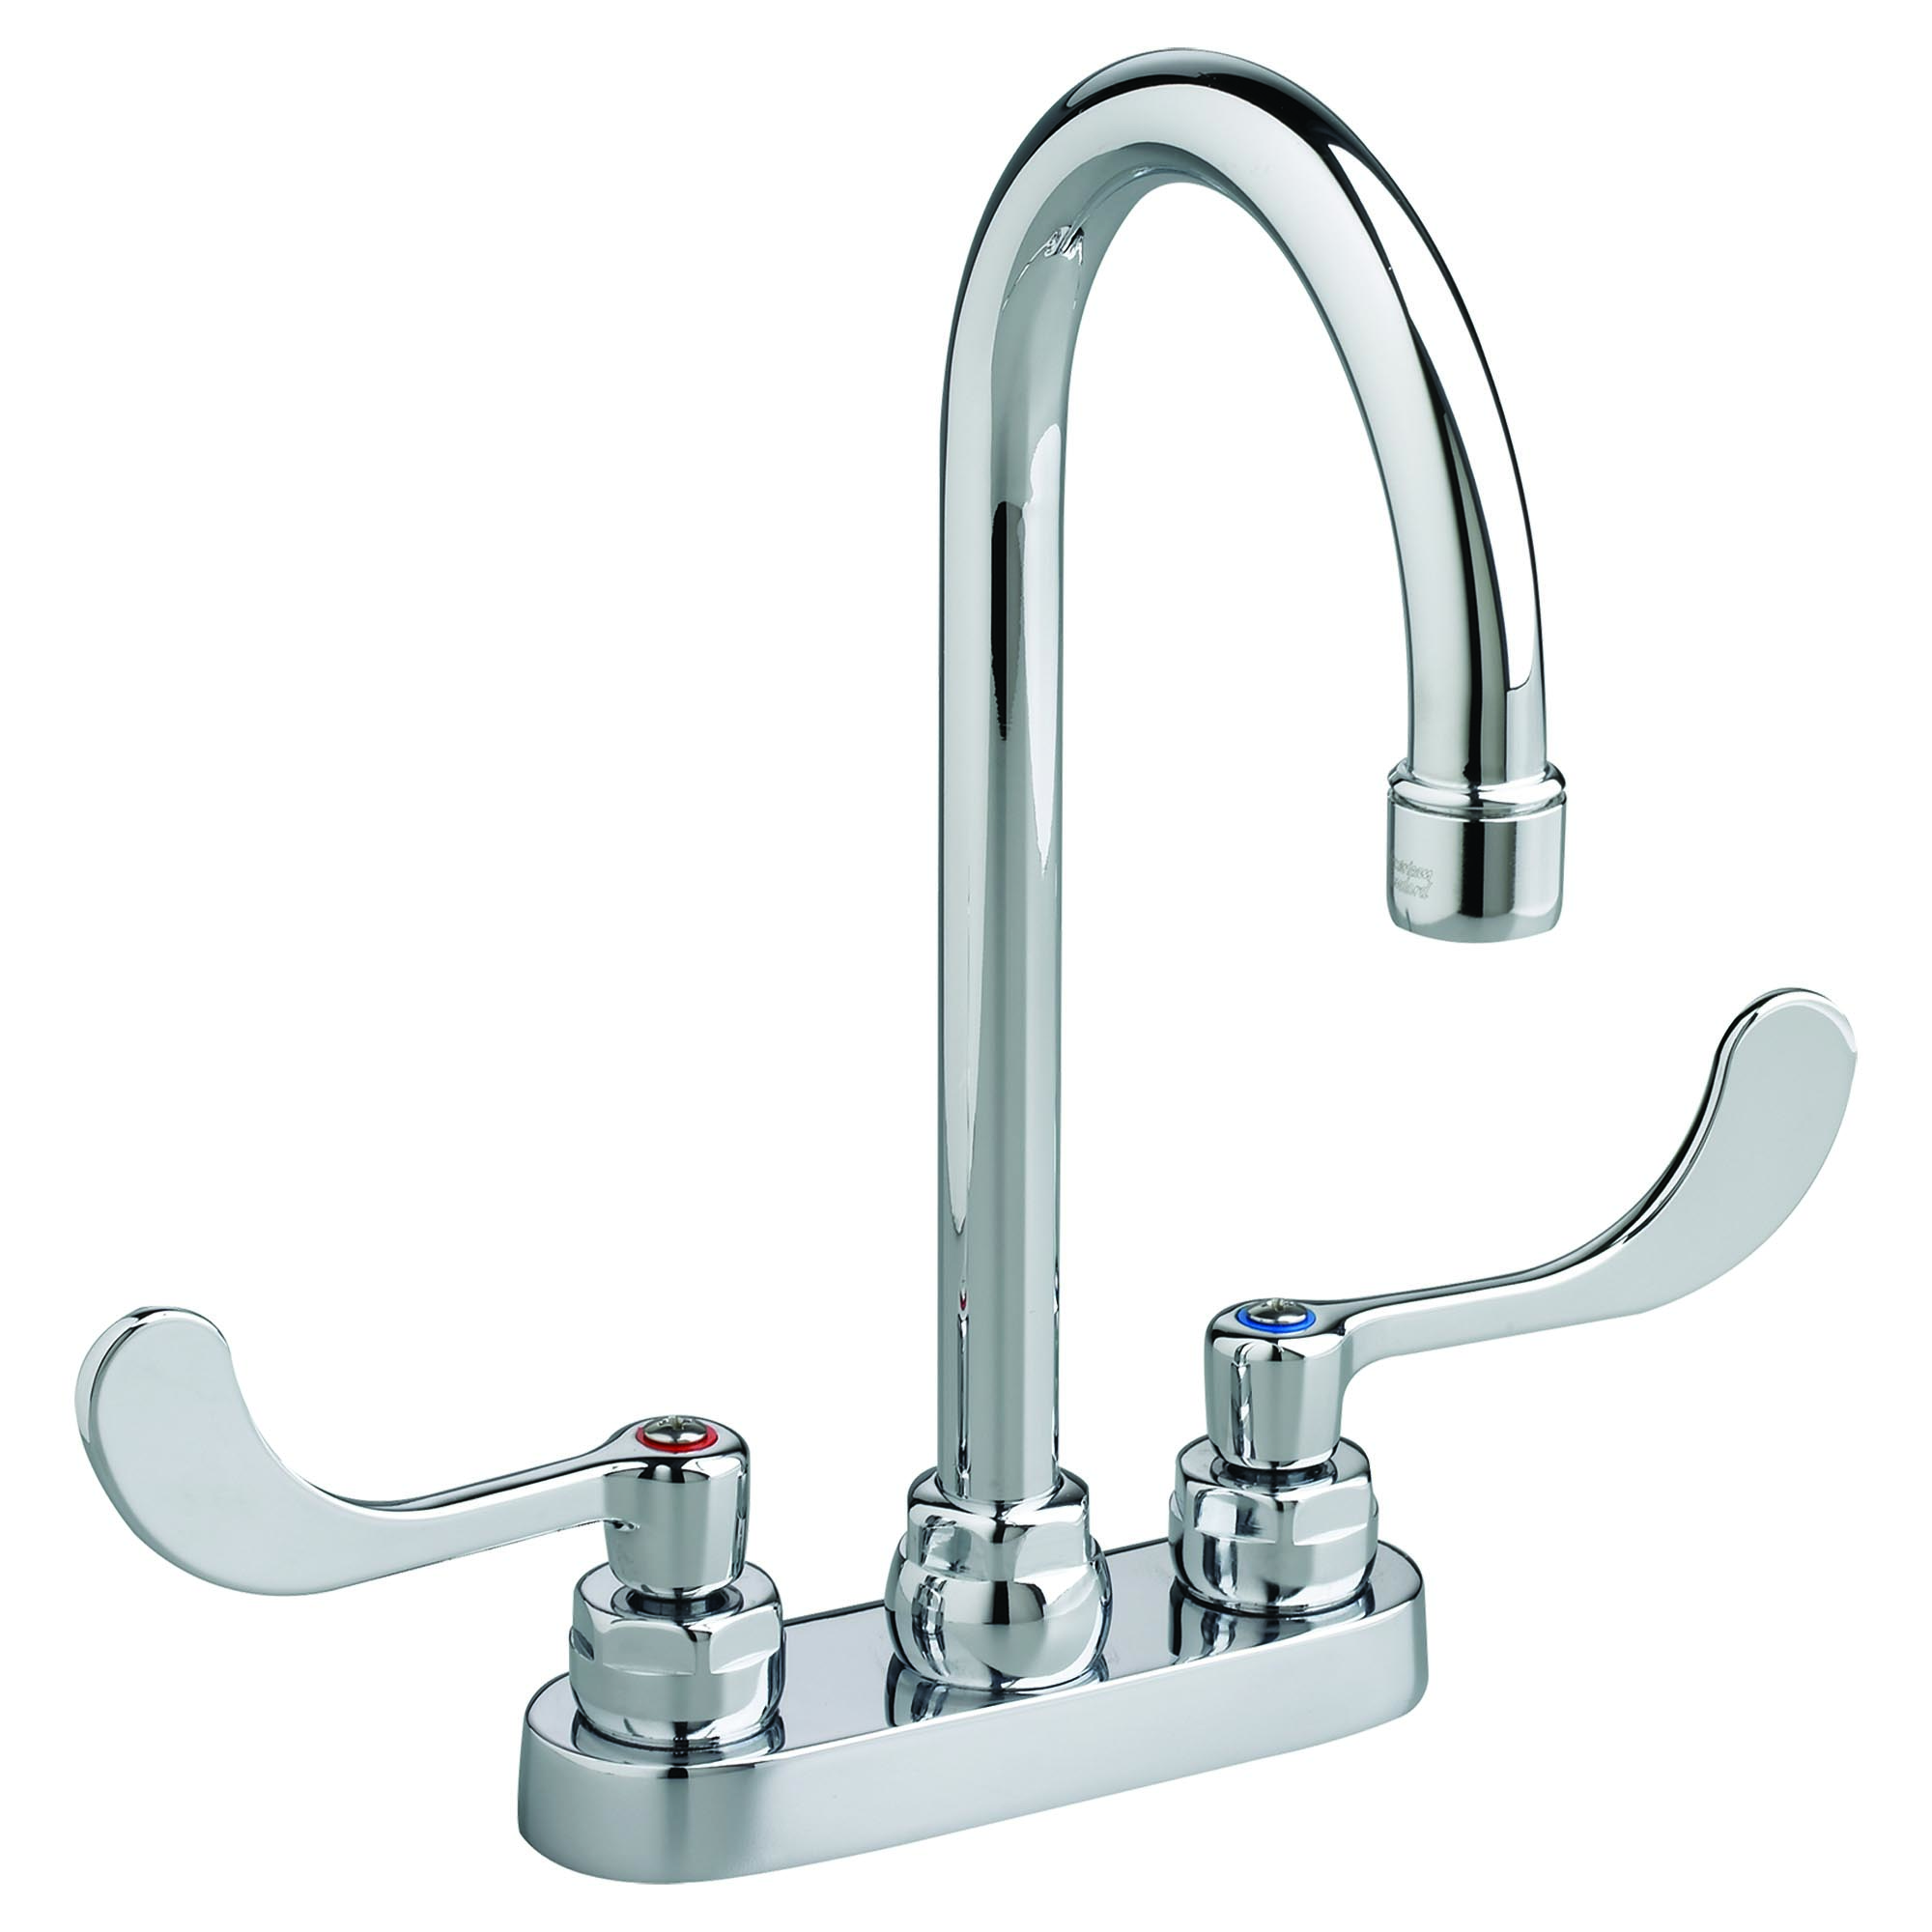 Monterrey™ 4-Inch Centerset Gooseneck Faucet With Wrist Blade Handles 1.5 gpm/5.7 Lpm With Limited Swivel